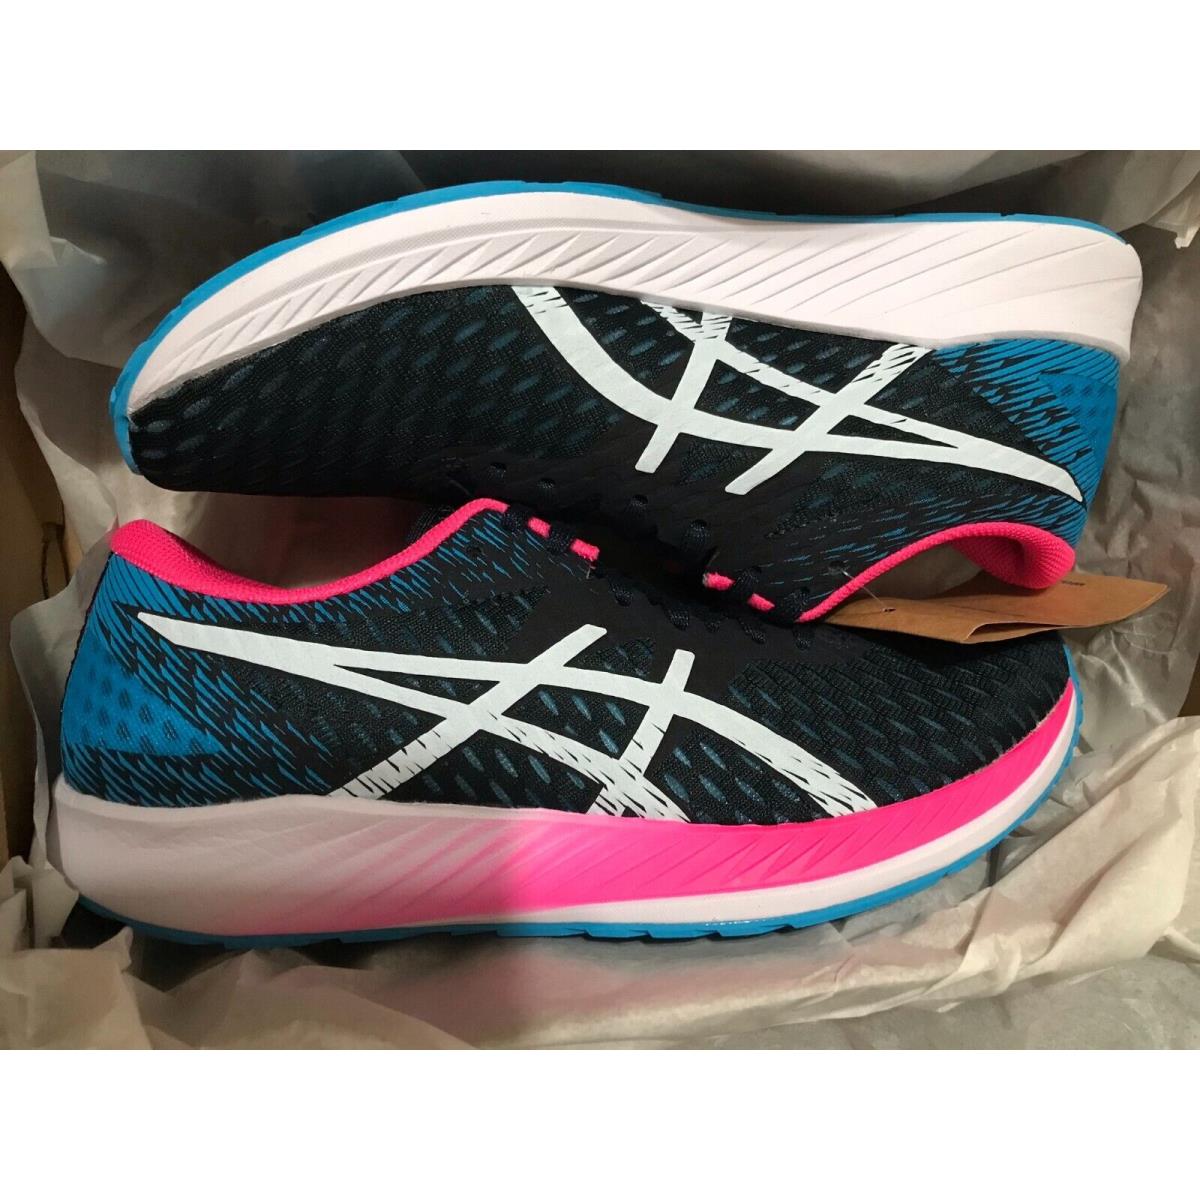 ASICS shoes Hyper Speed - French Blue/White/Pink 7